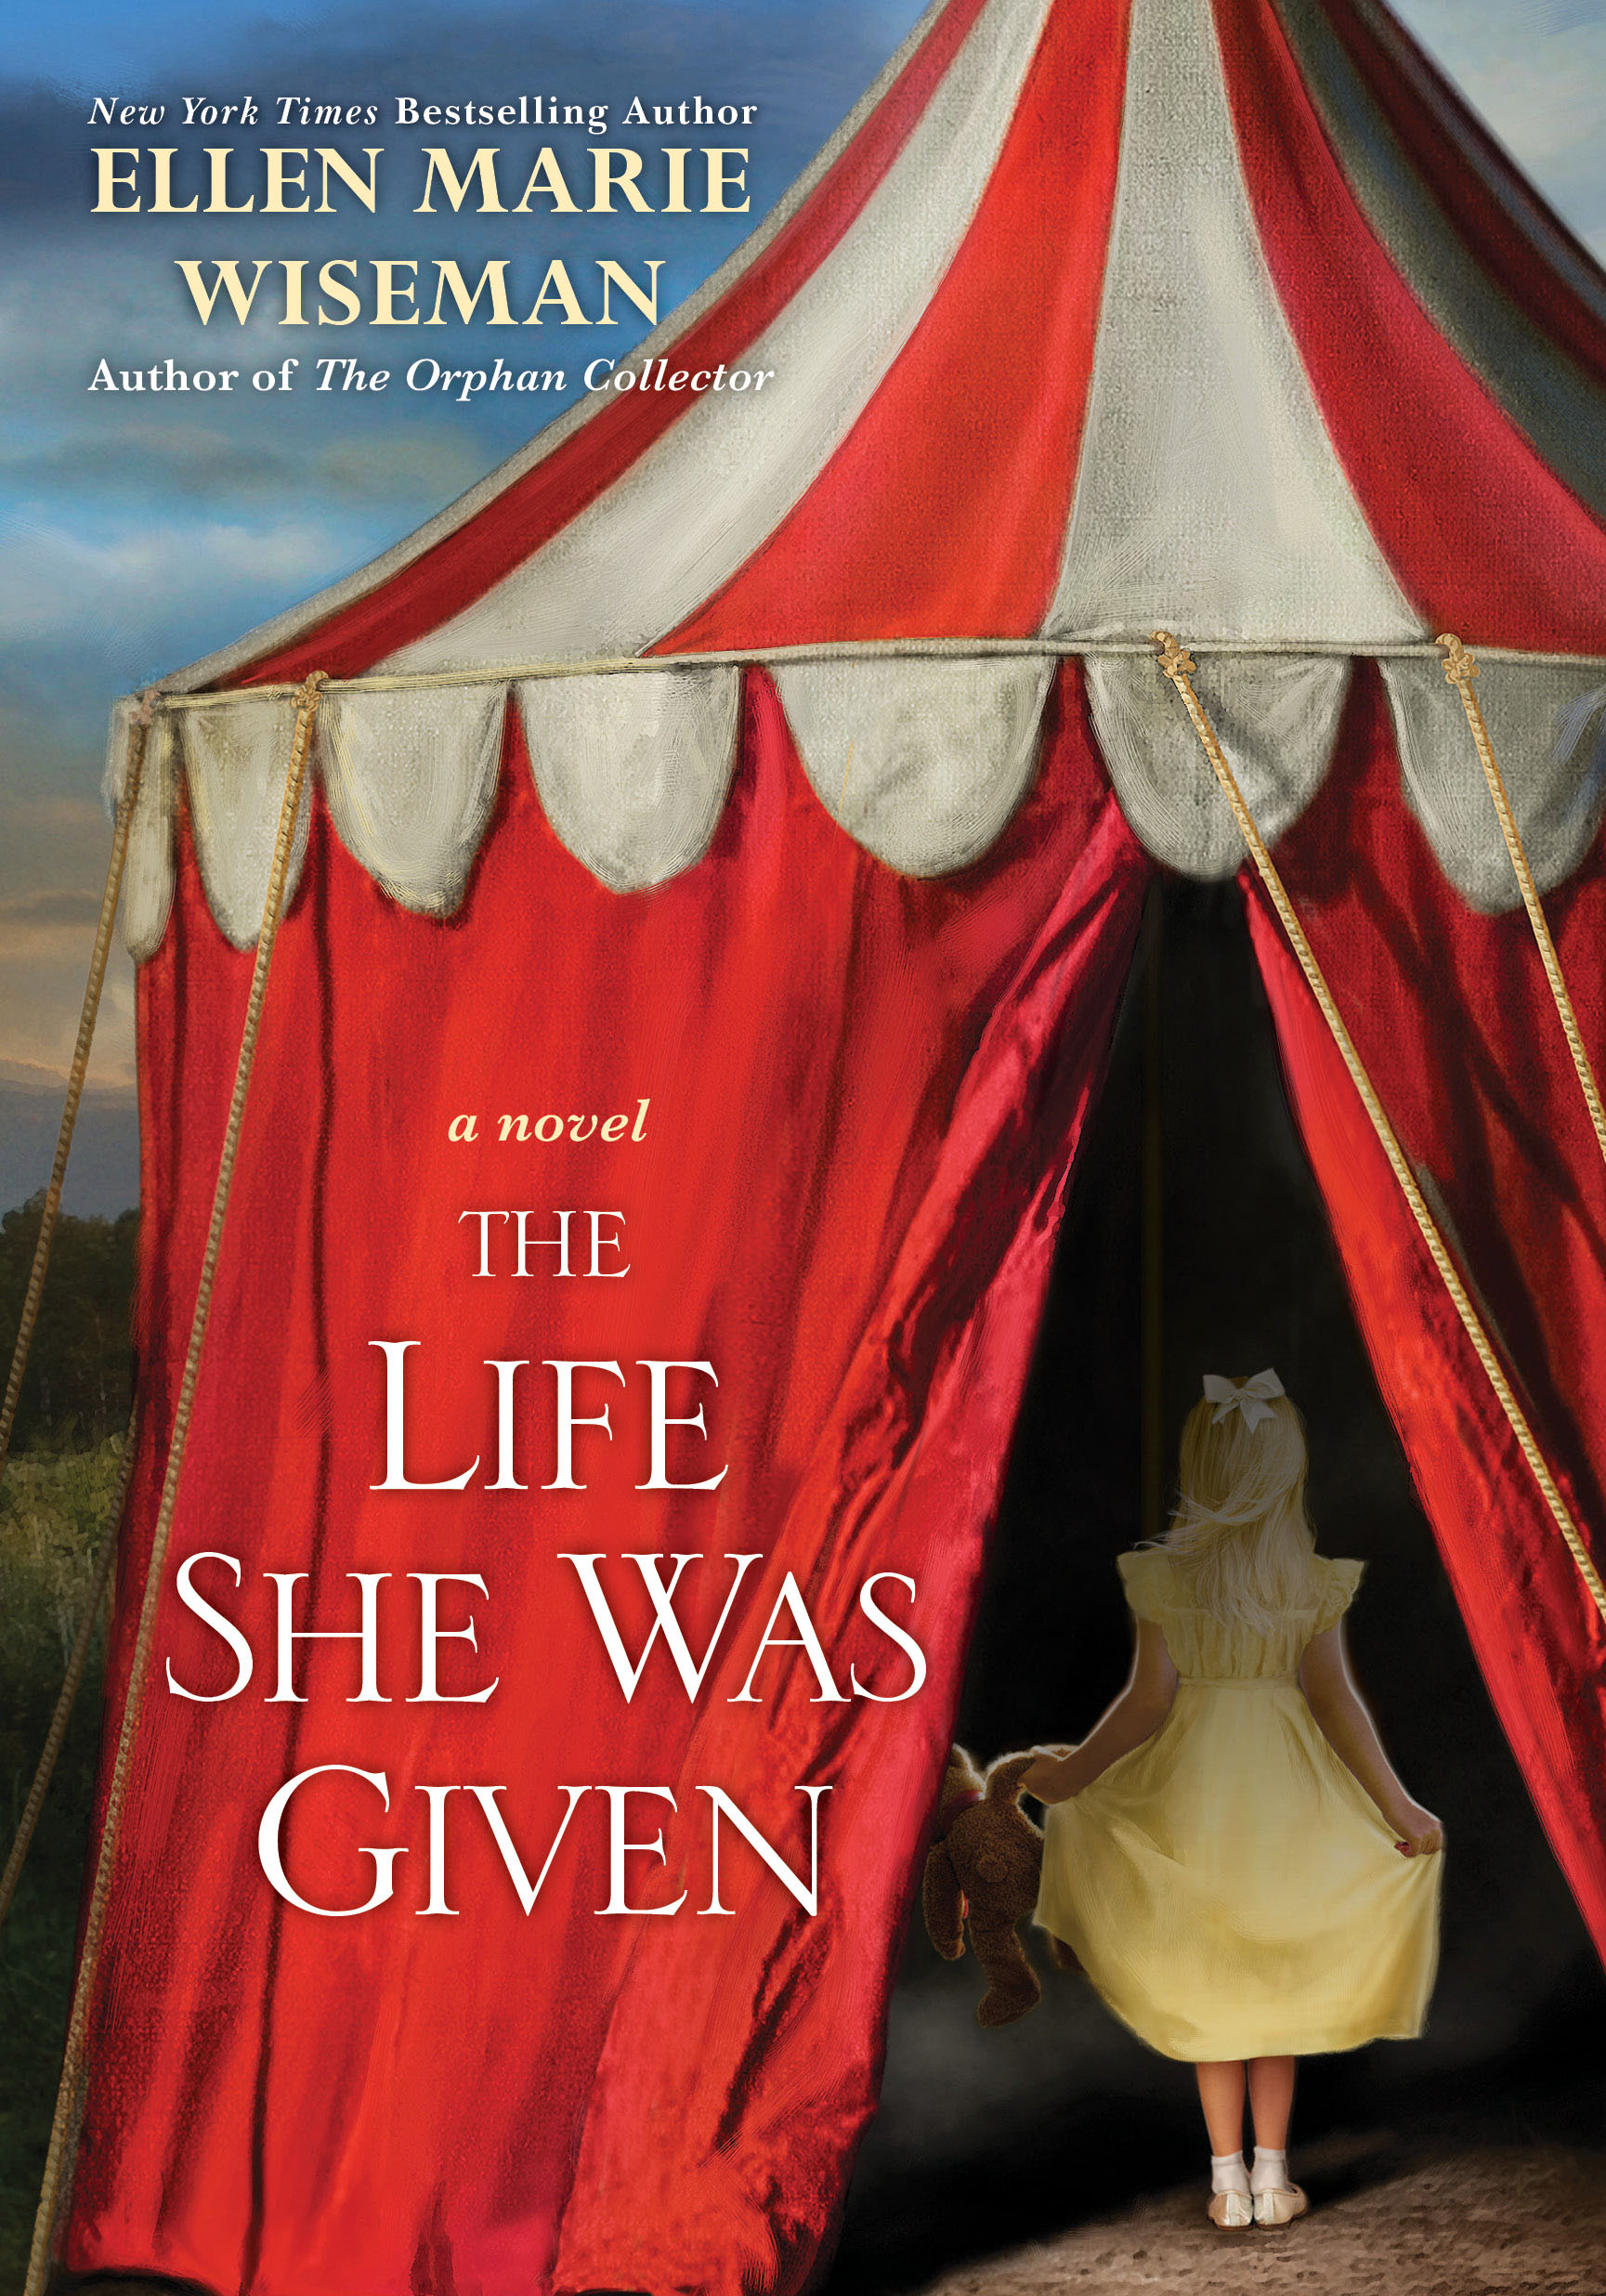 the life she was given__Wiseman_TRD_REPRINT